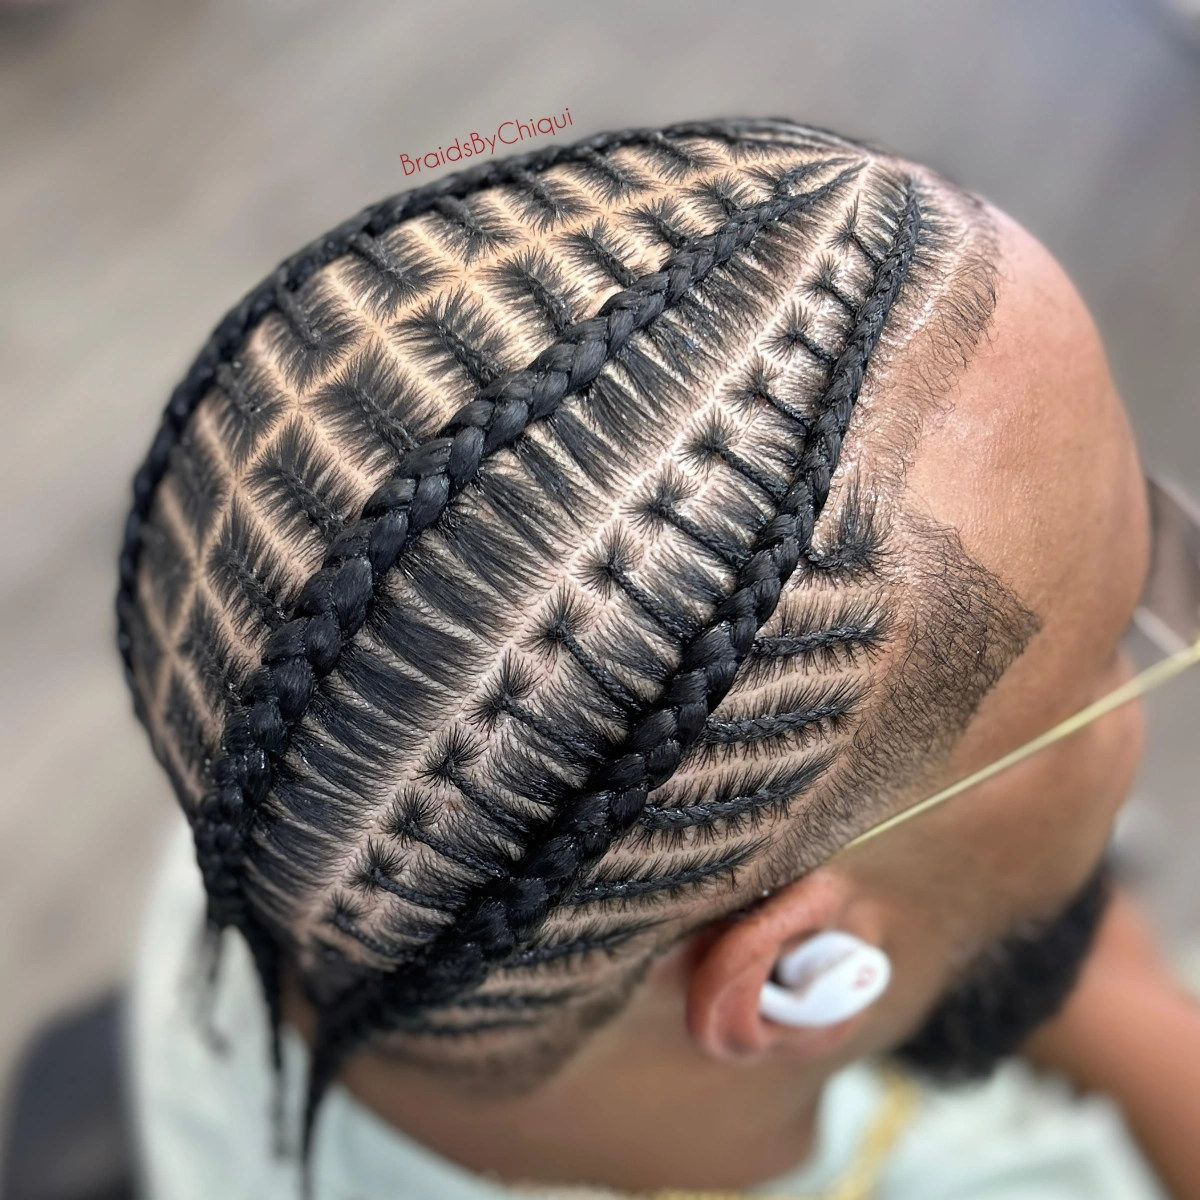 coiffure afro homme natte collee cornrows cheveux longs